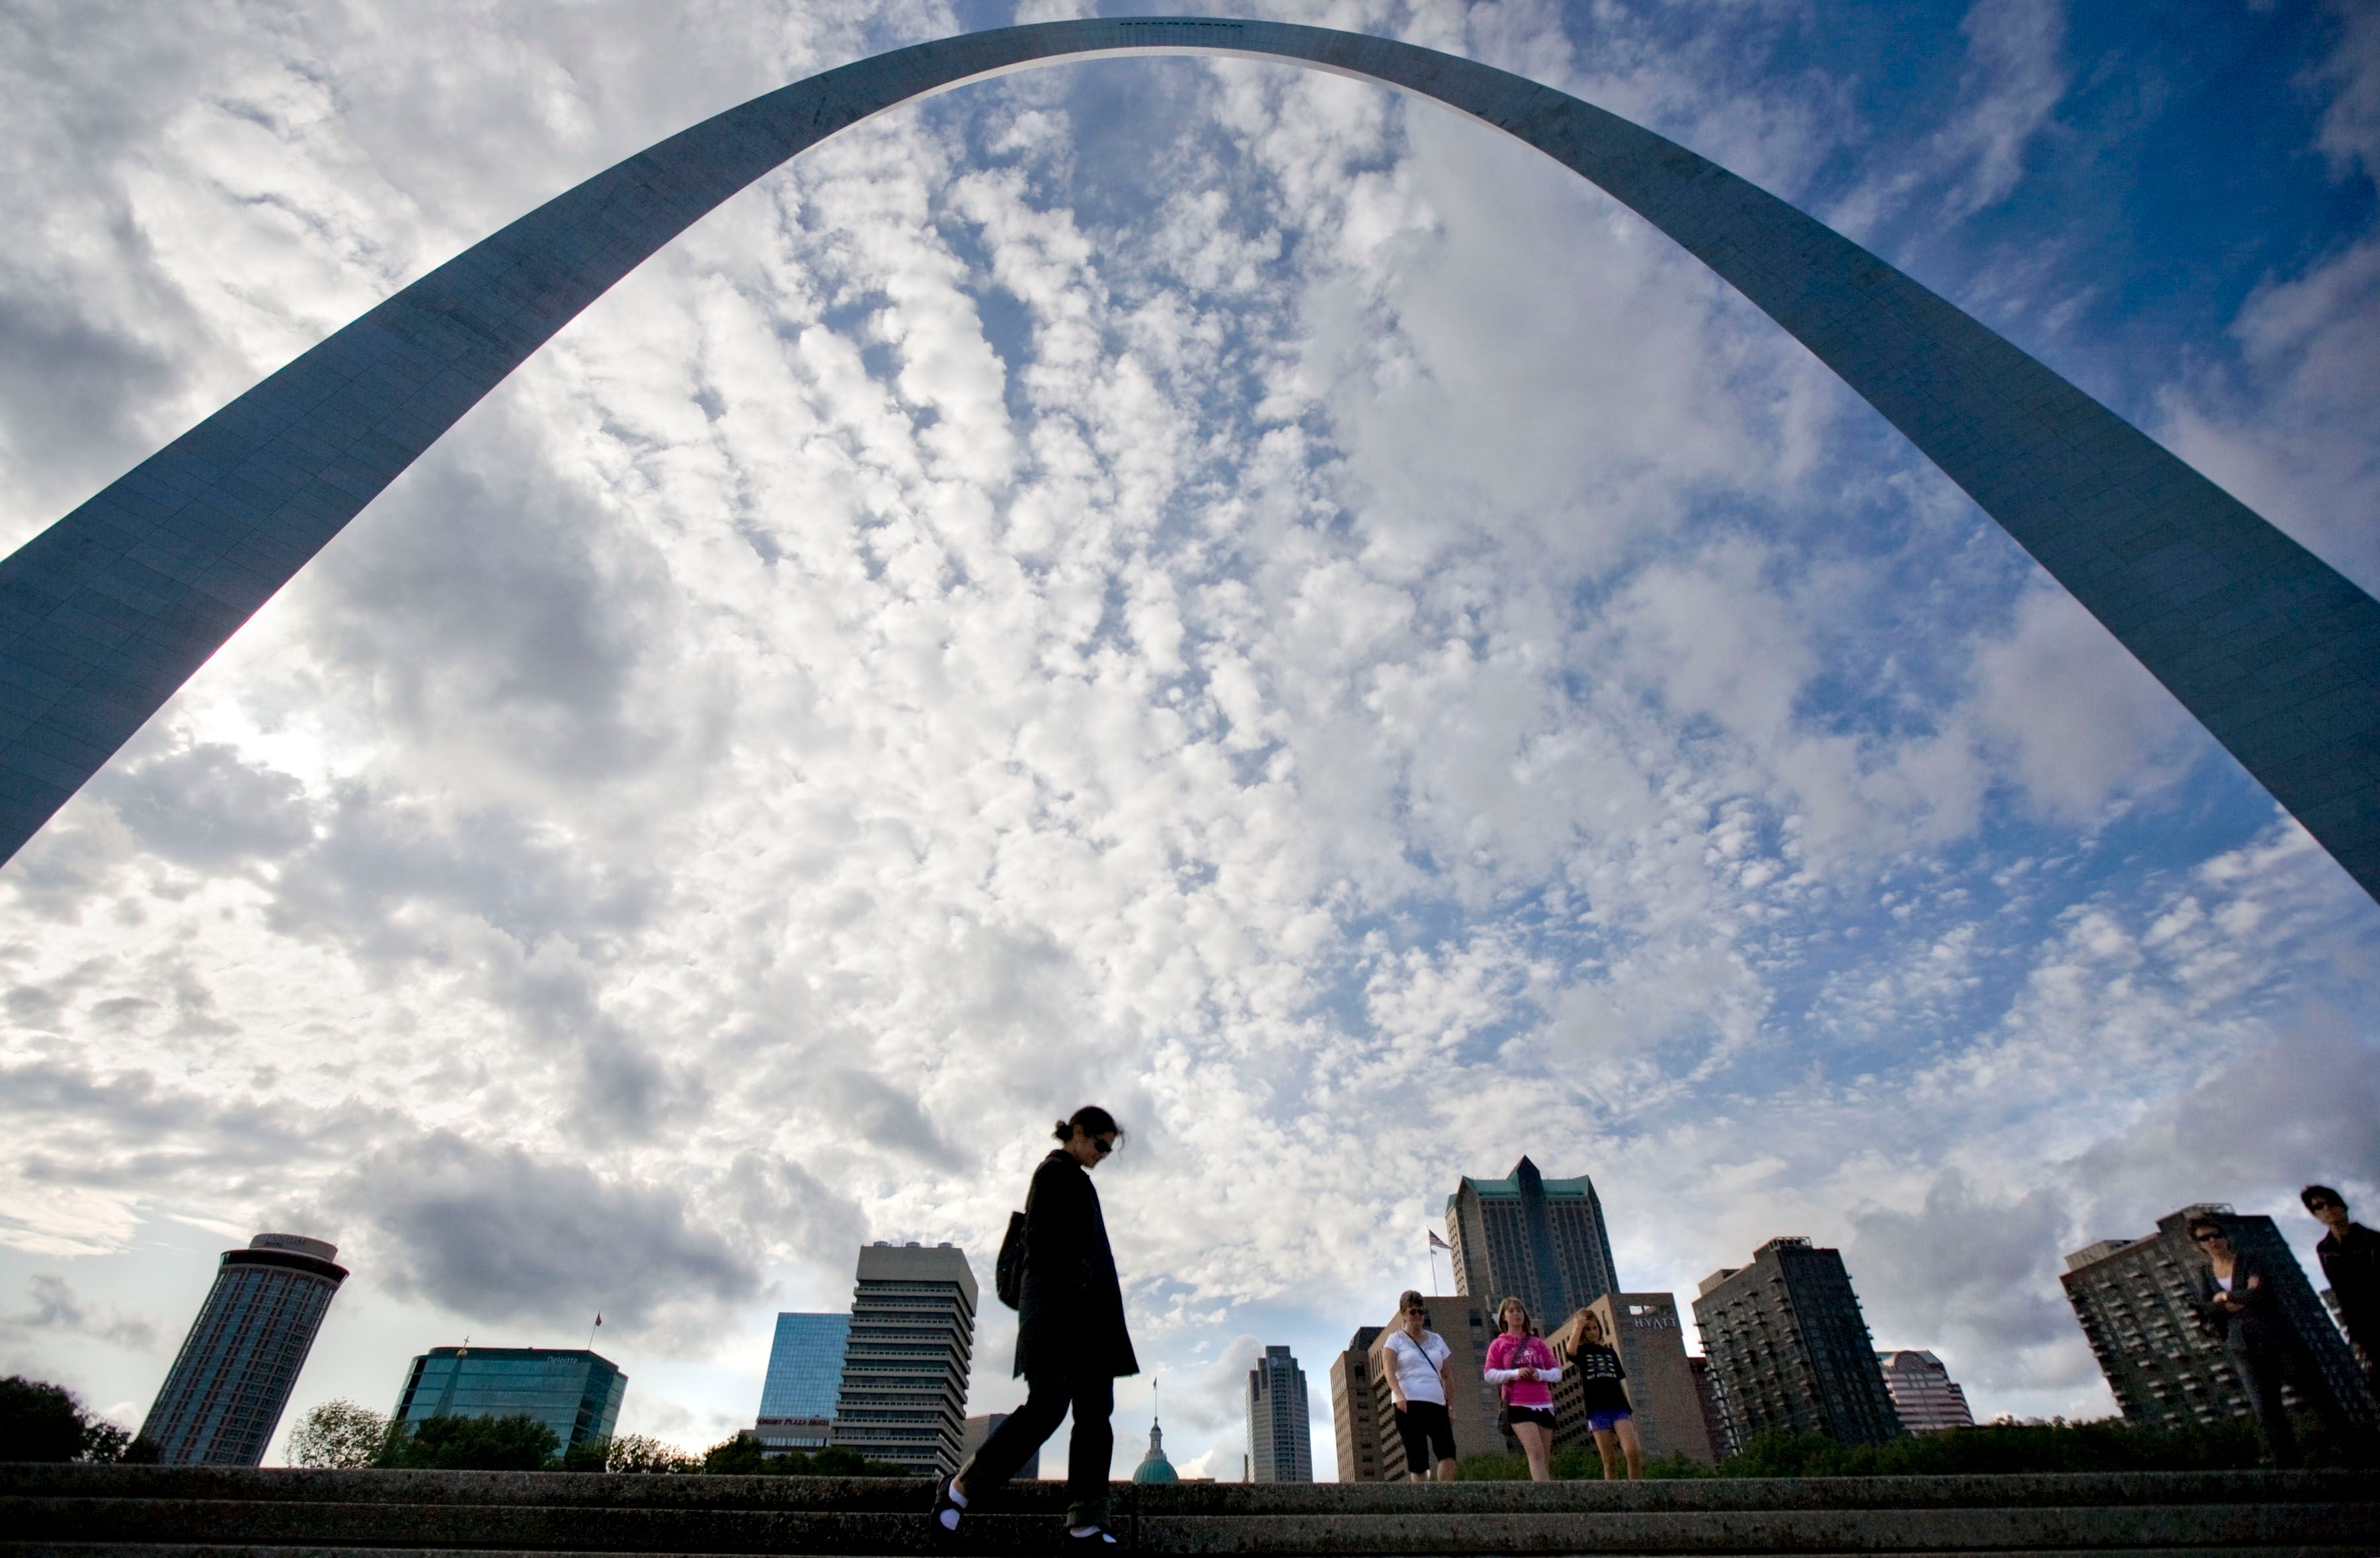 (Evelyn Hockstein | The New York Times) The Gateway Arch in St. Louis in 2009.